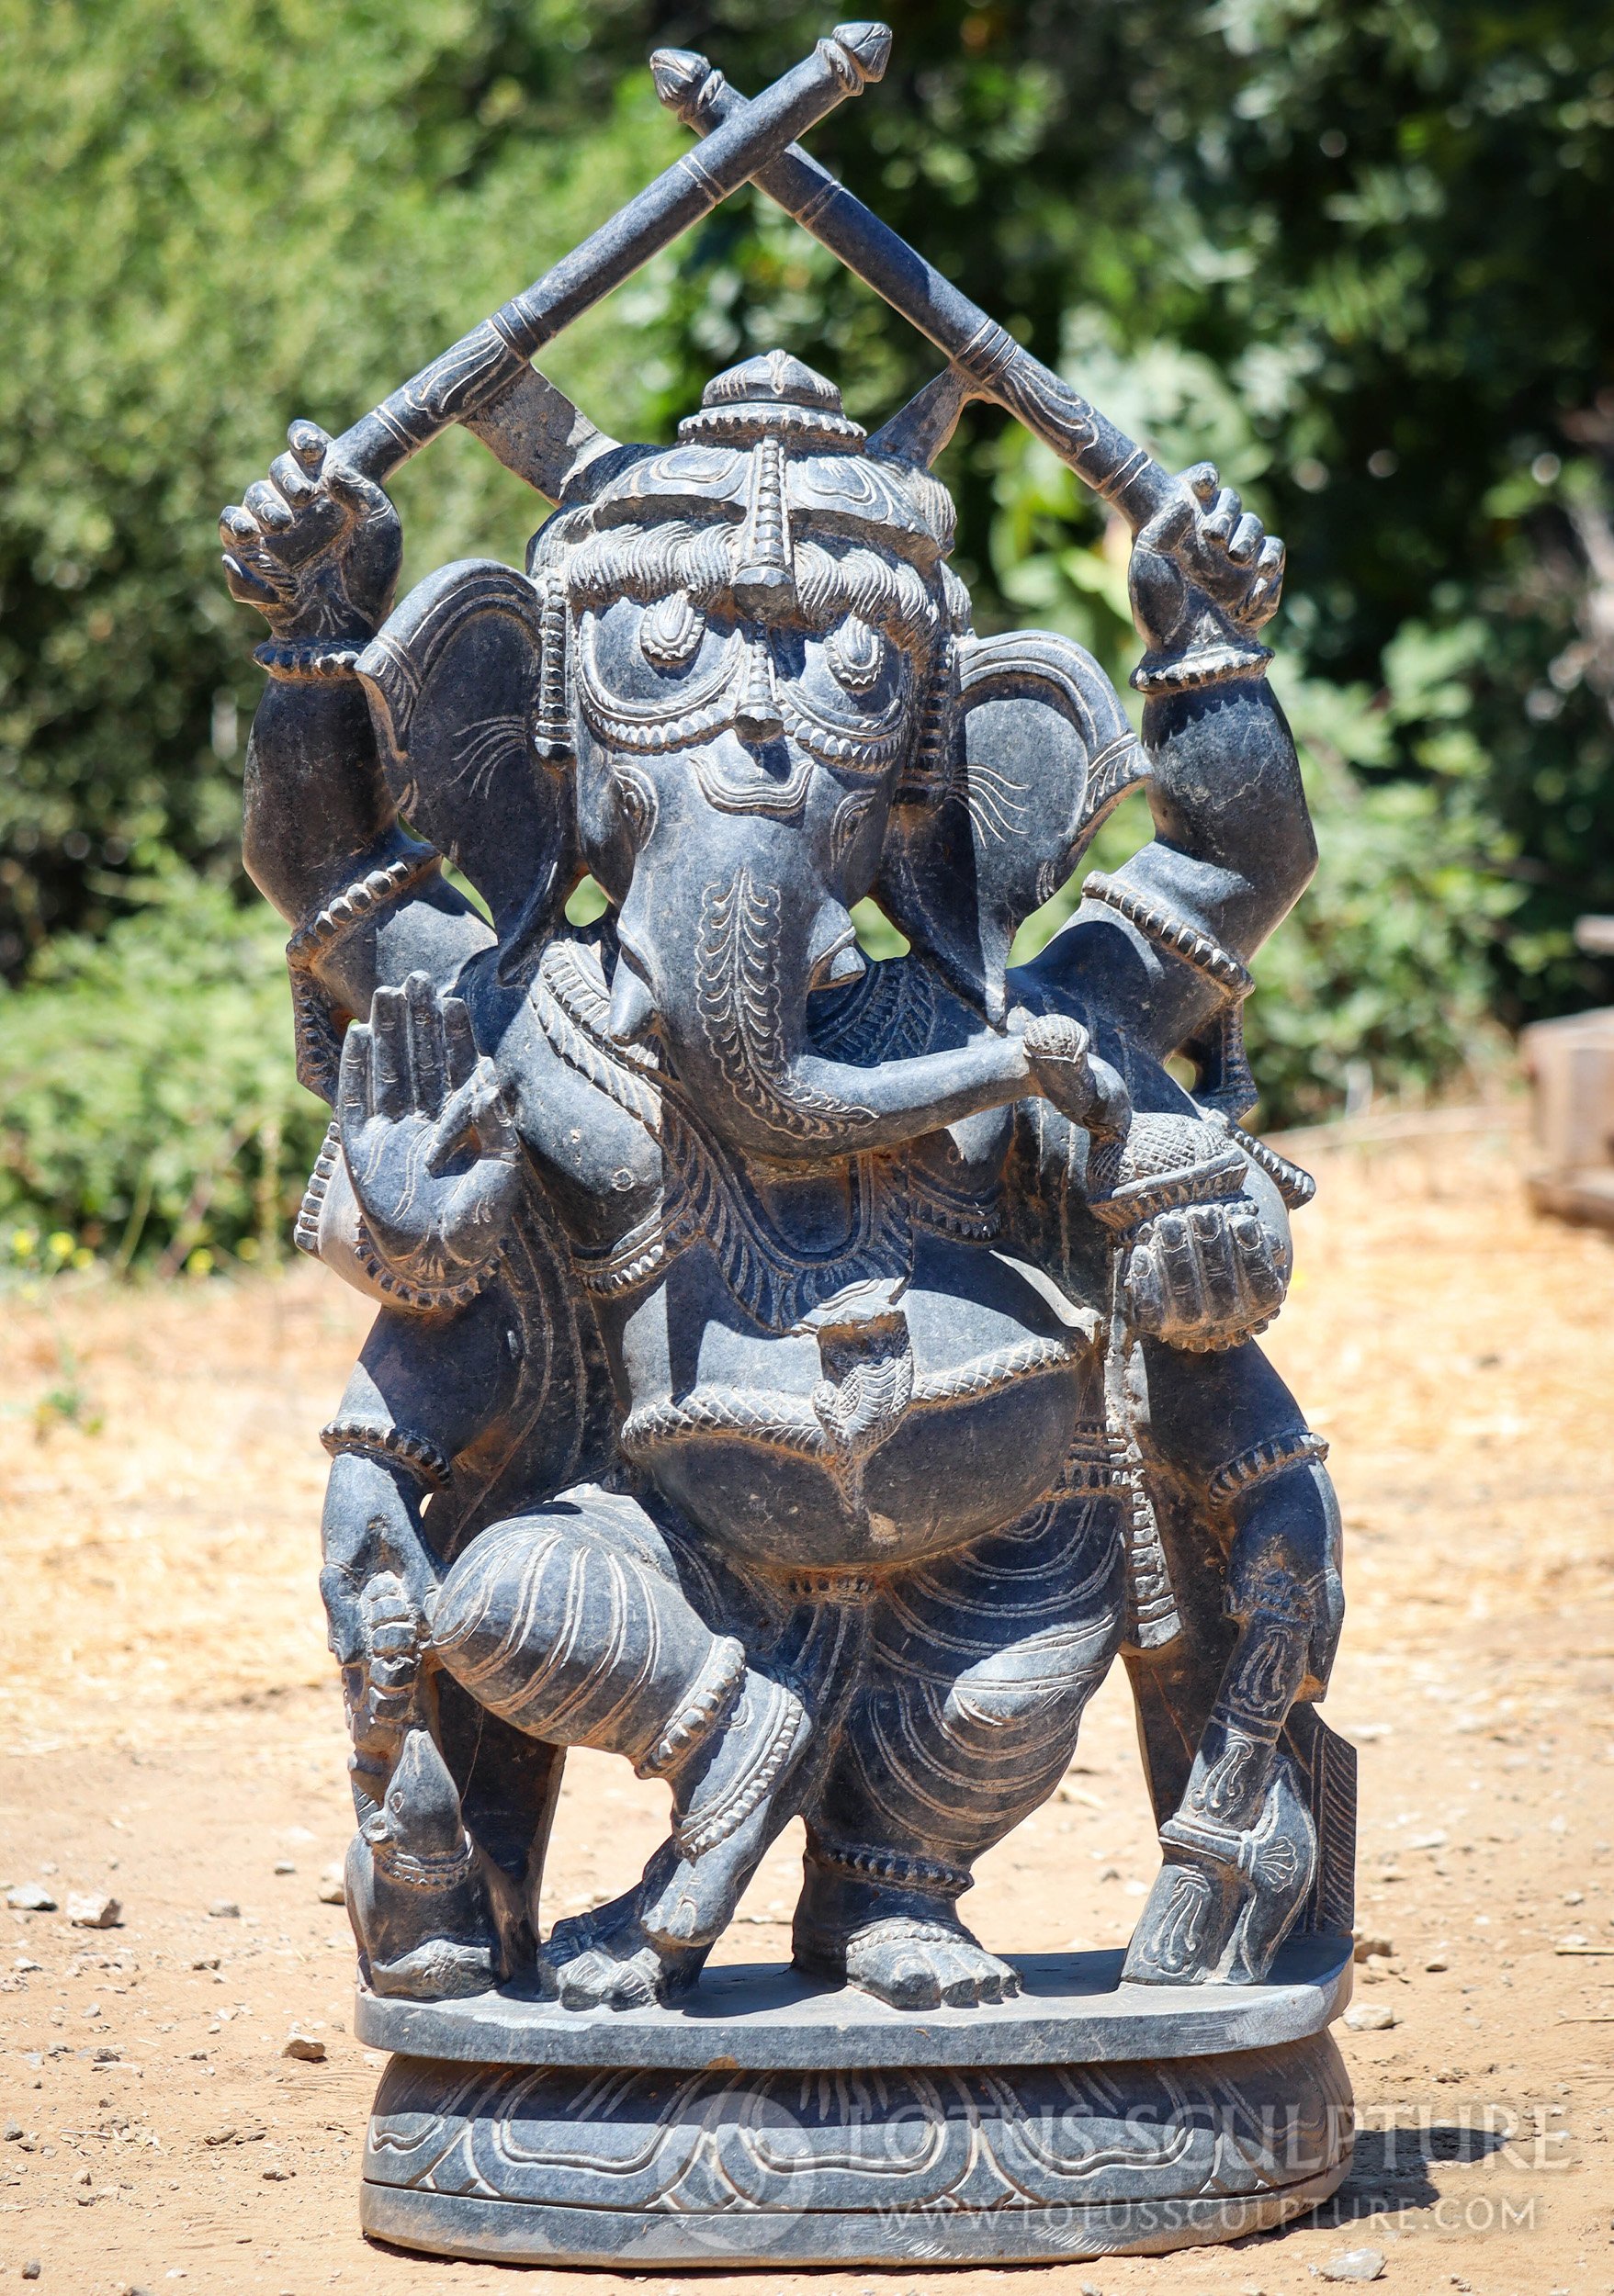 Ganesh Hand-Carved Odishan Granite Statue with Six Arms Holding Batons 39"